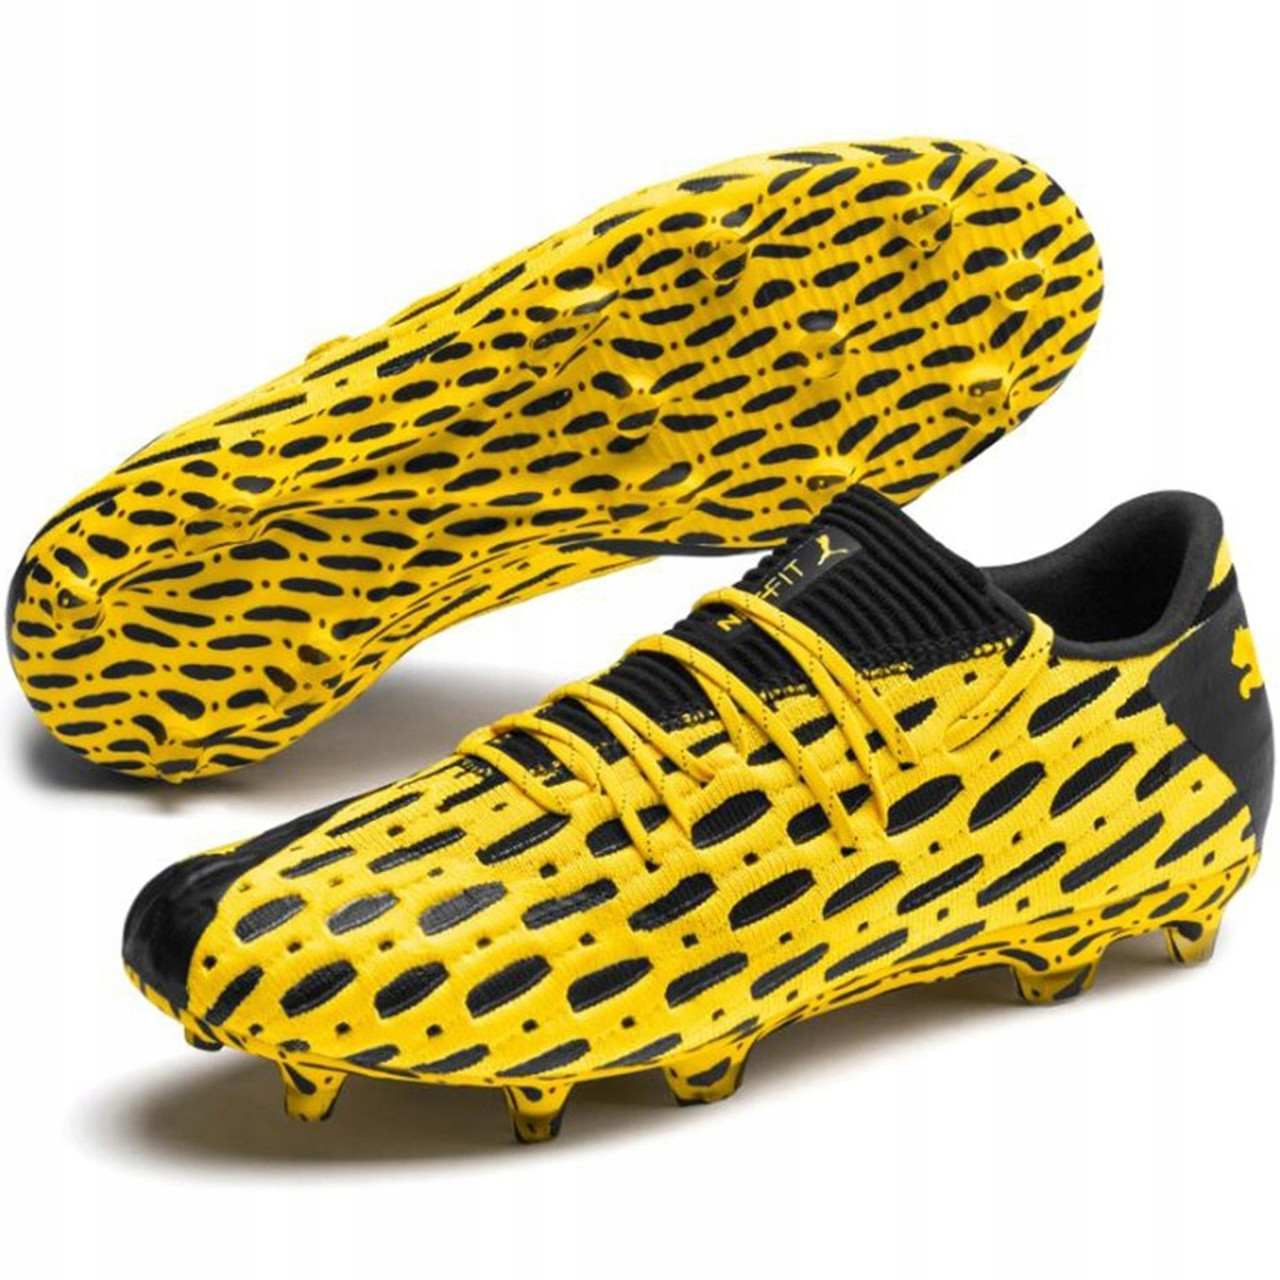 Puma Future 5.1 Netfit Low Firm Ground Soccer Cleats 02/Ultra Yellow-Black  - Chicago Soccer